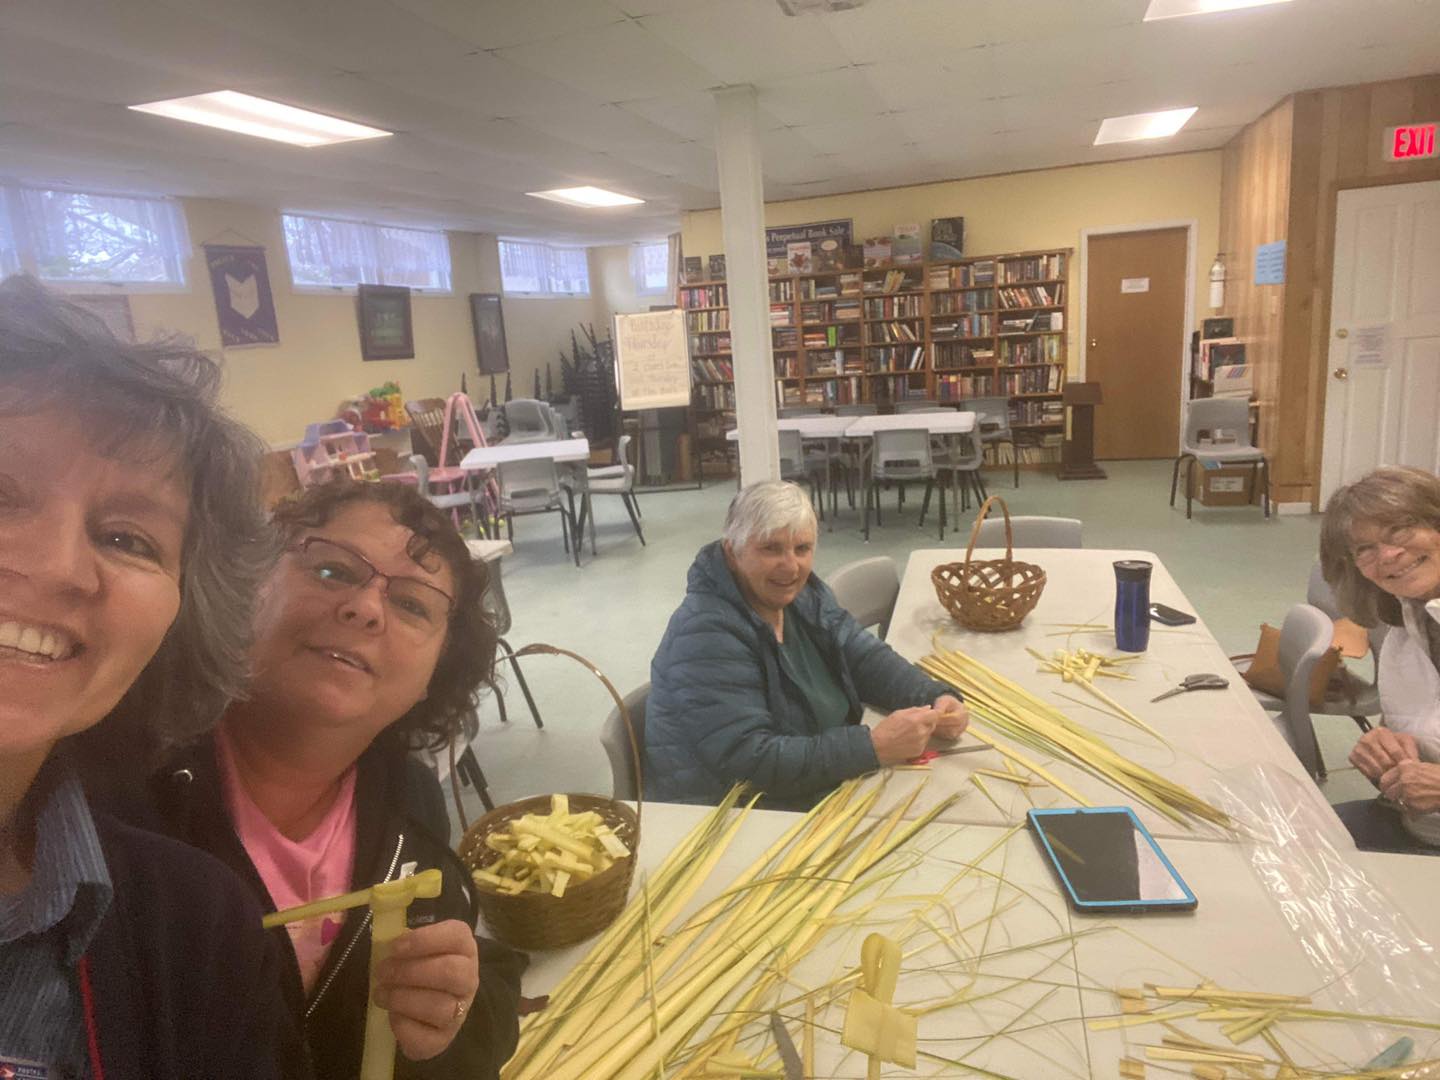 On Saturday, April 1st, members of St. Luke's Parish prepared for Palm Sunday by making Palm crosses. Pictured is Susan, Lyda, Joanne and Stephanie.